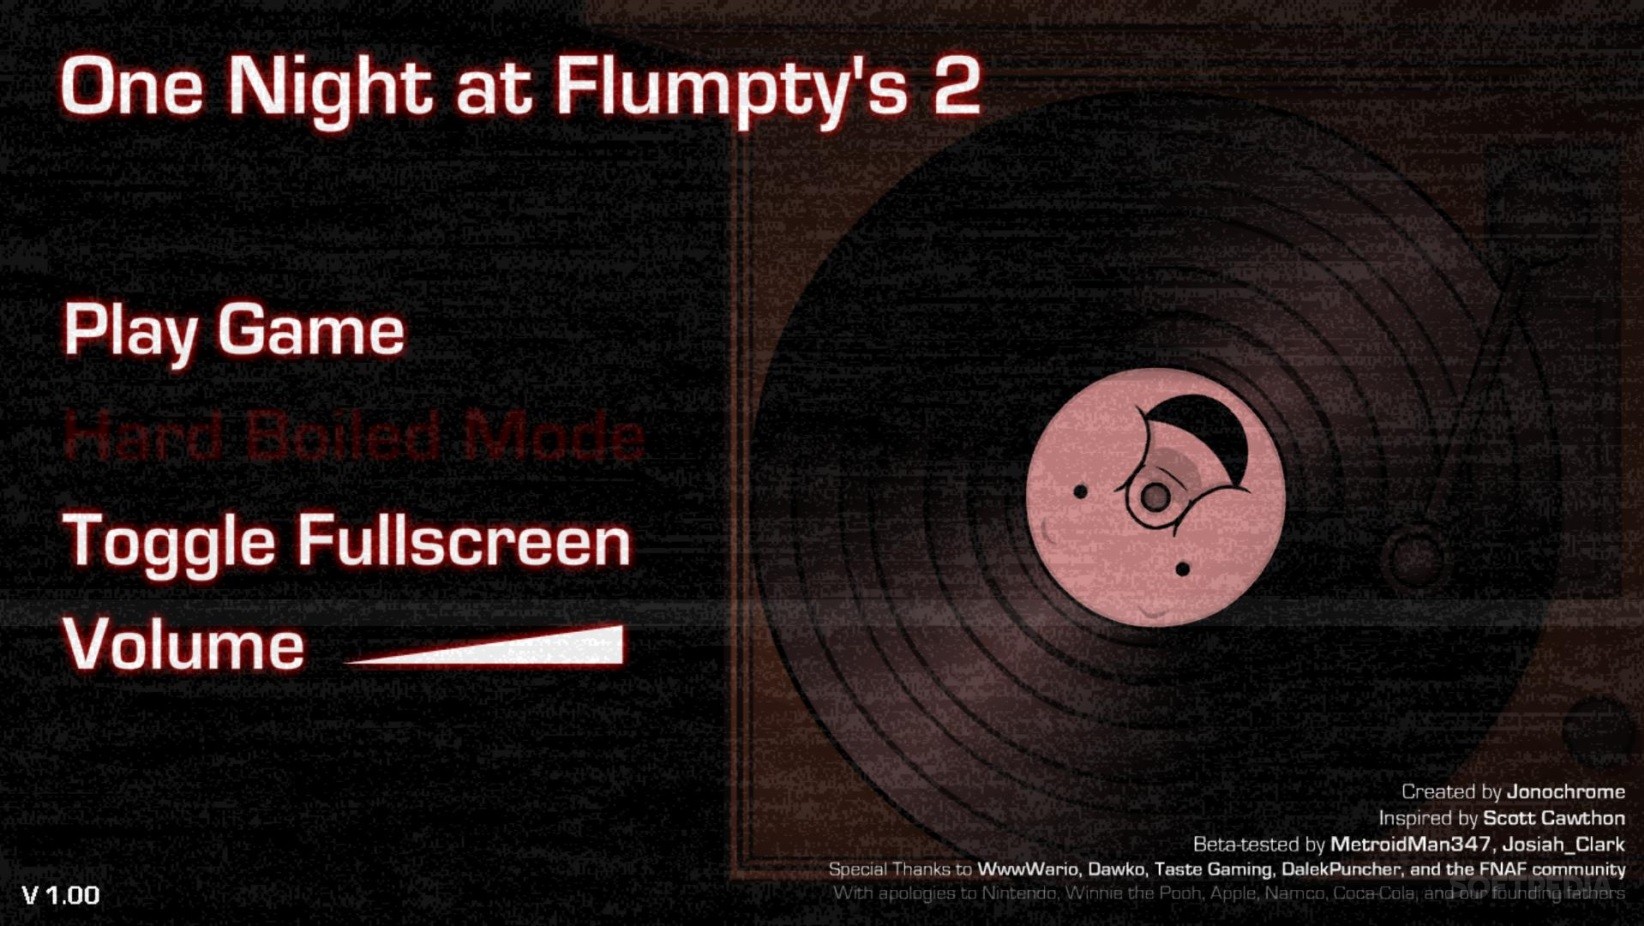 One night at flumpty's 2 Download (Last Version) Free PC Game Torrent